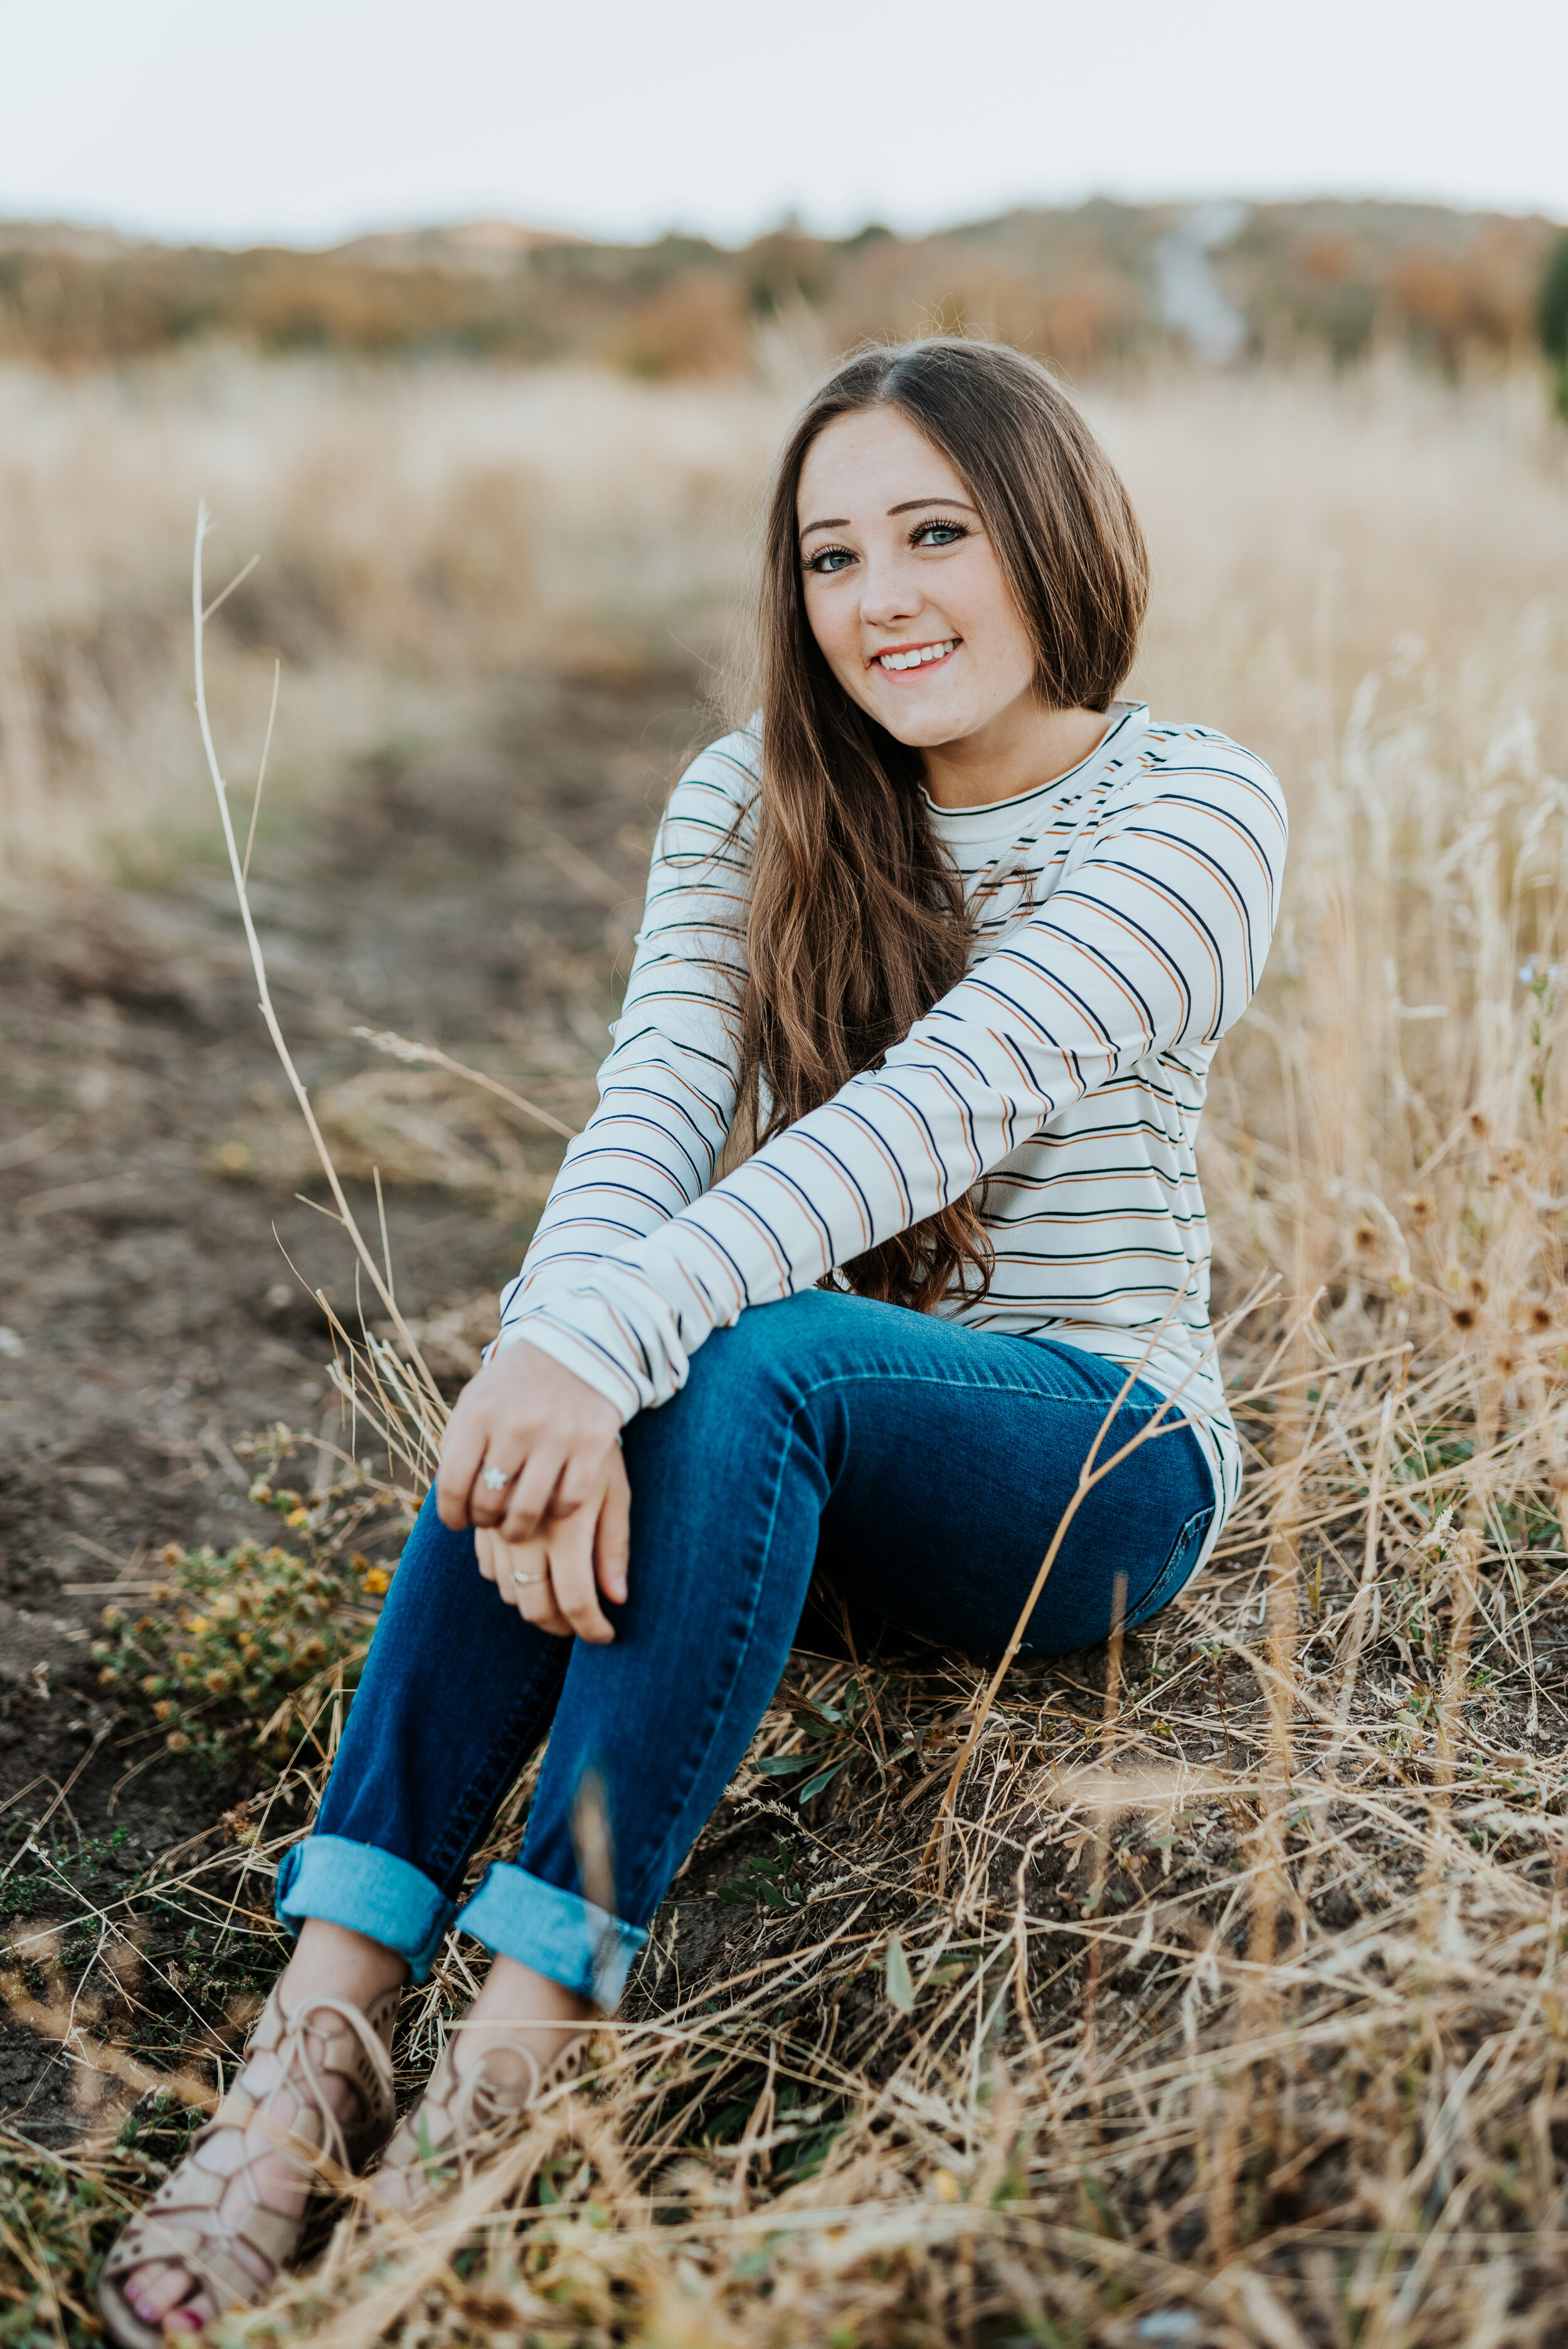  Casual outfit inspiration and cute high school senior poses for senior photo sessions. casual senior picture outfits senior in high school graduating class of 2020 professional photographers in utah cache valley senior photo poses logan utah photographers teen fashion senior pictures photo session outfit inspiration #kristialysephotography #professionalphotographersinutah #utahphotographers #seniorportraits #cachevalley #loganutah #casualseniorpictureoutfits #teenfashion #senior #classof2020 